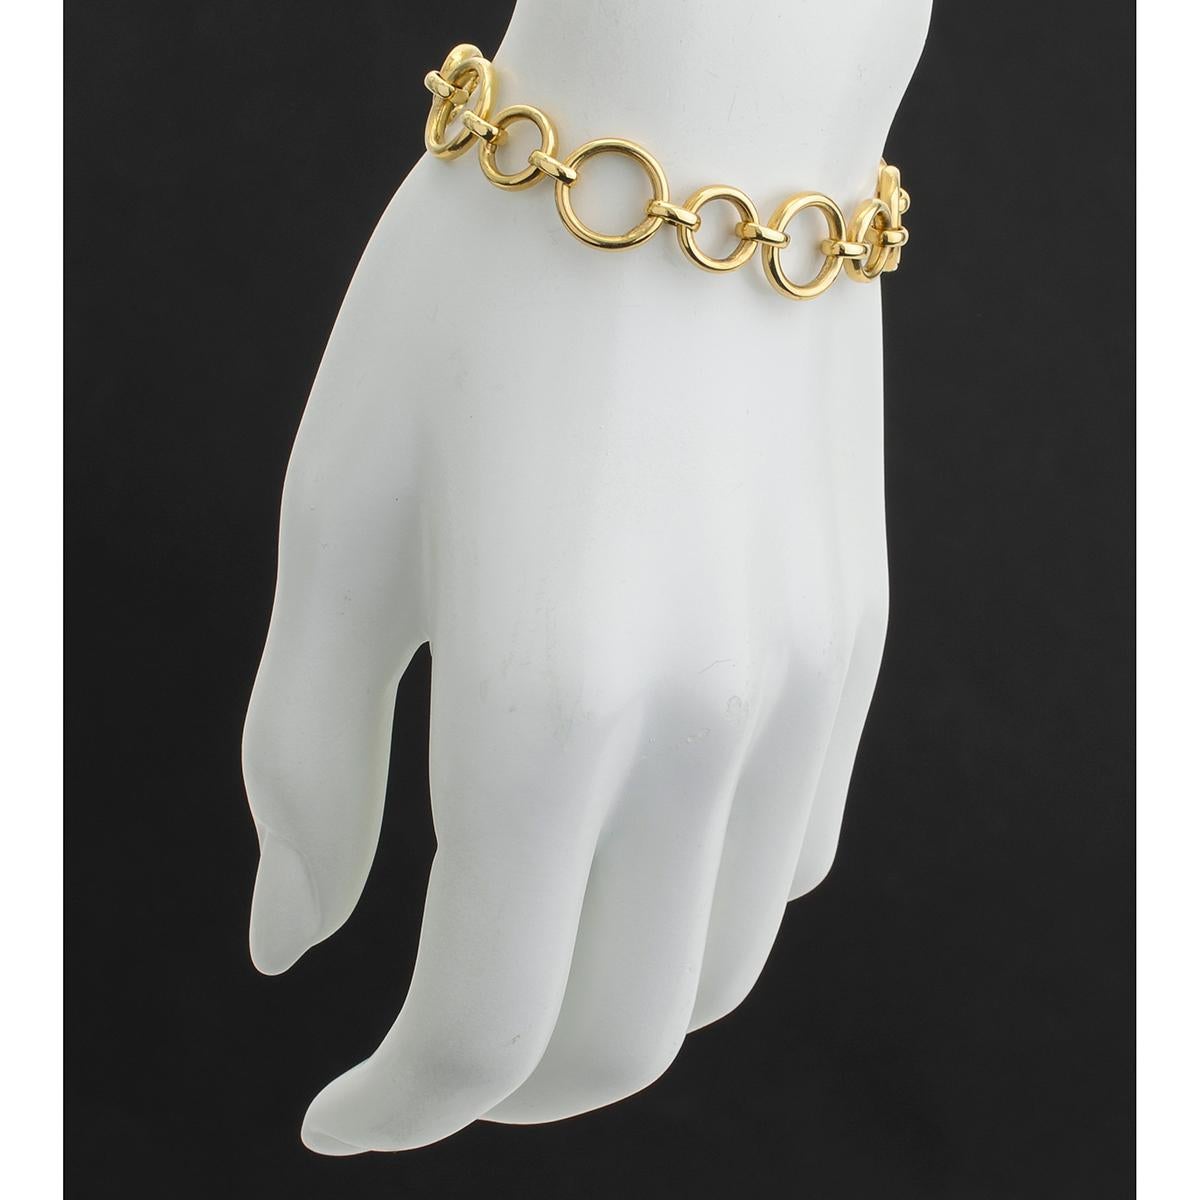 Link bracelet, featuring larger and smaller alternating circle-shaped links, in 18k yellow gold. Lobster claw clasp. 7